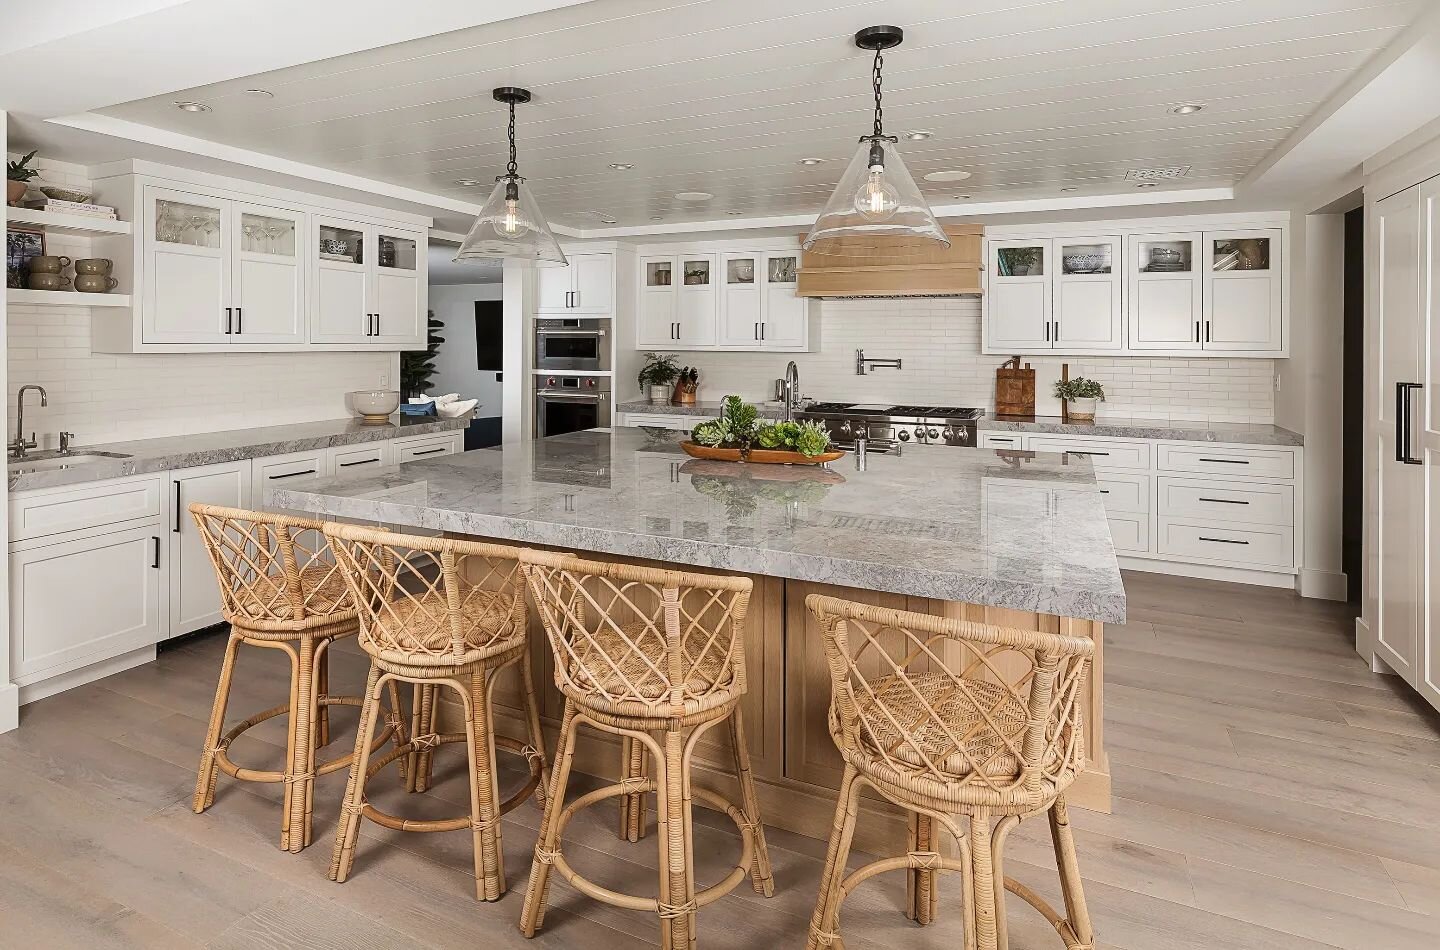 We revamped an outdated kitchen and gave it some personality!  We incorporated a mix of white tile and grey marble and added some fun rattan wood stools to give it the perfect coastal vibe. 

Interior Design @tru.studio_
Builder @uccustomhomes

#trus